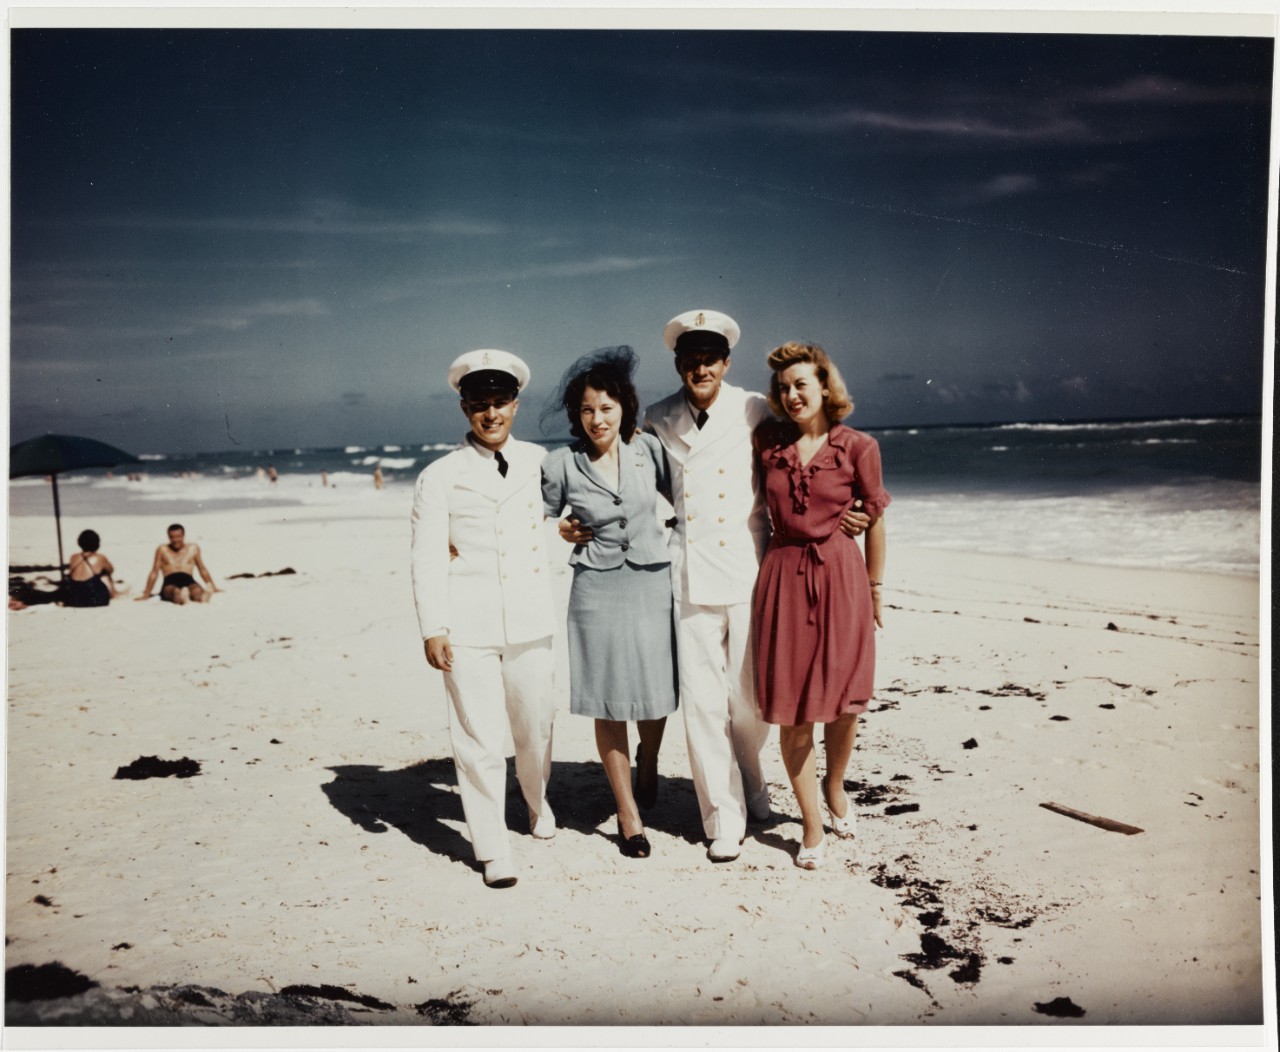 Two Chief Petty Officers walk with their wives, on a Bermuda beach, circa late 1945